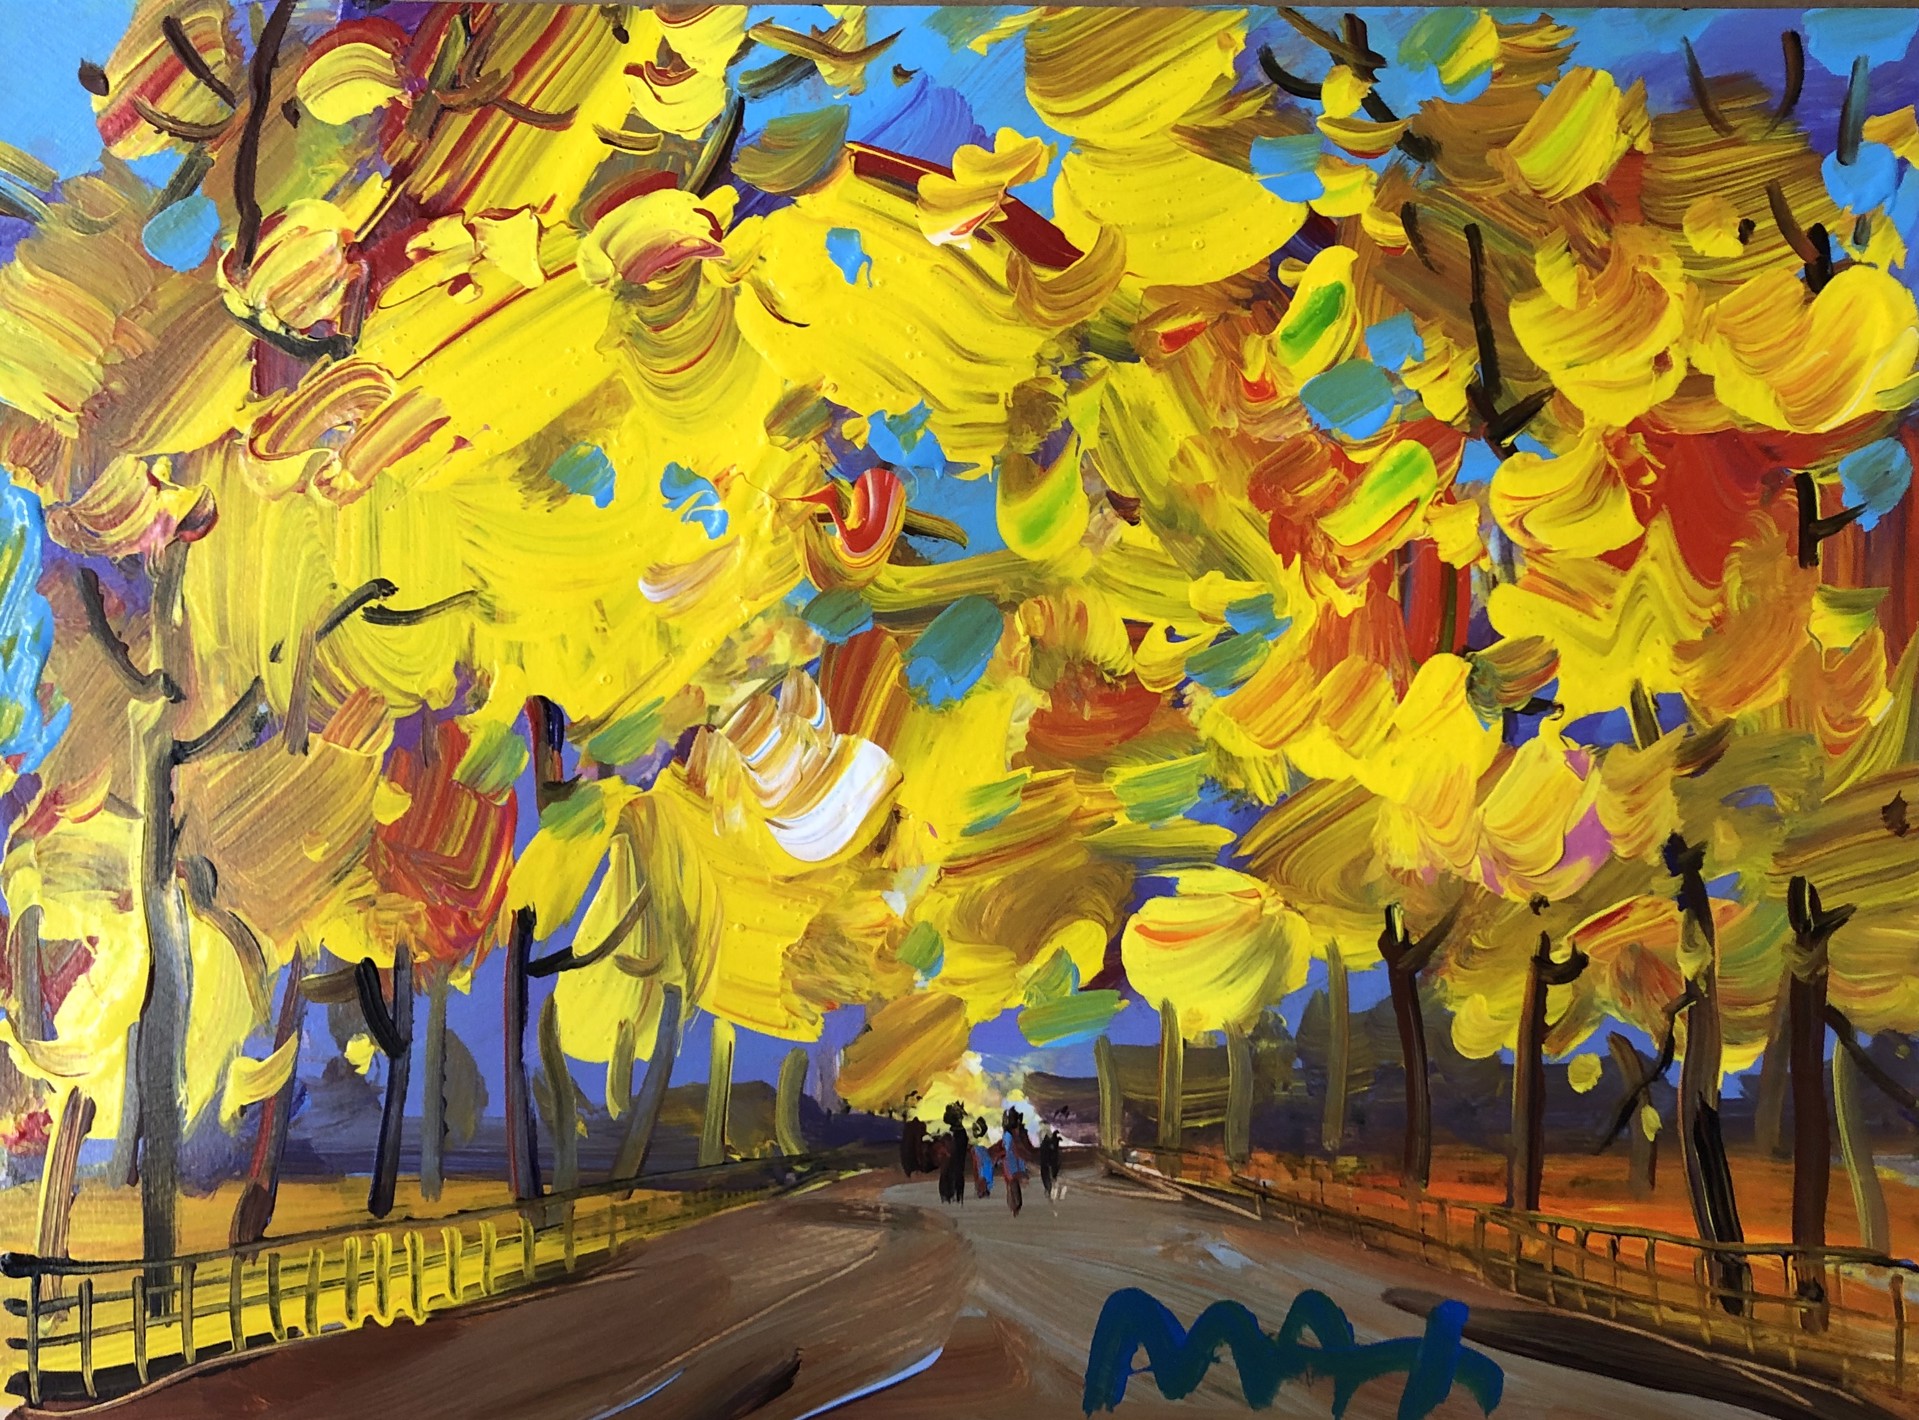 Four Seasons II: Autumn (Central Park) by Peter Max